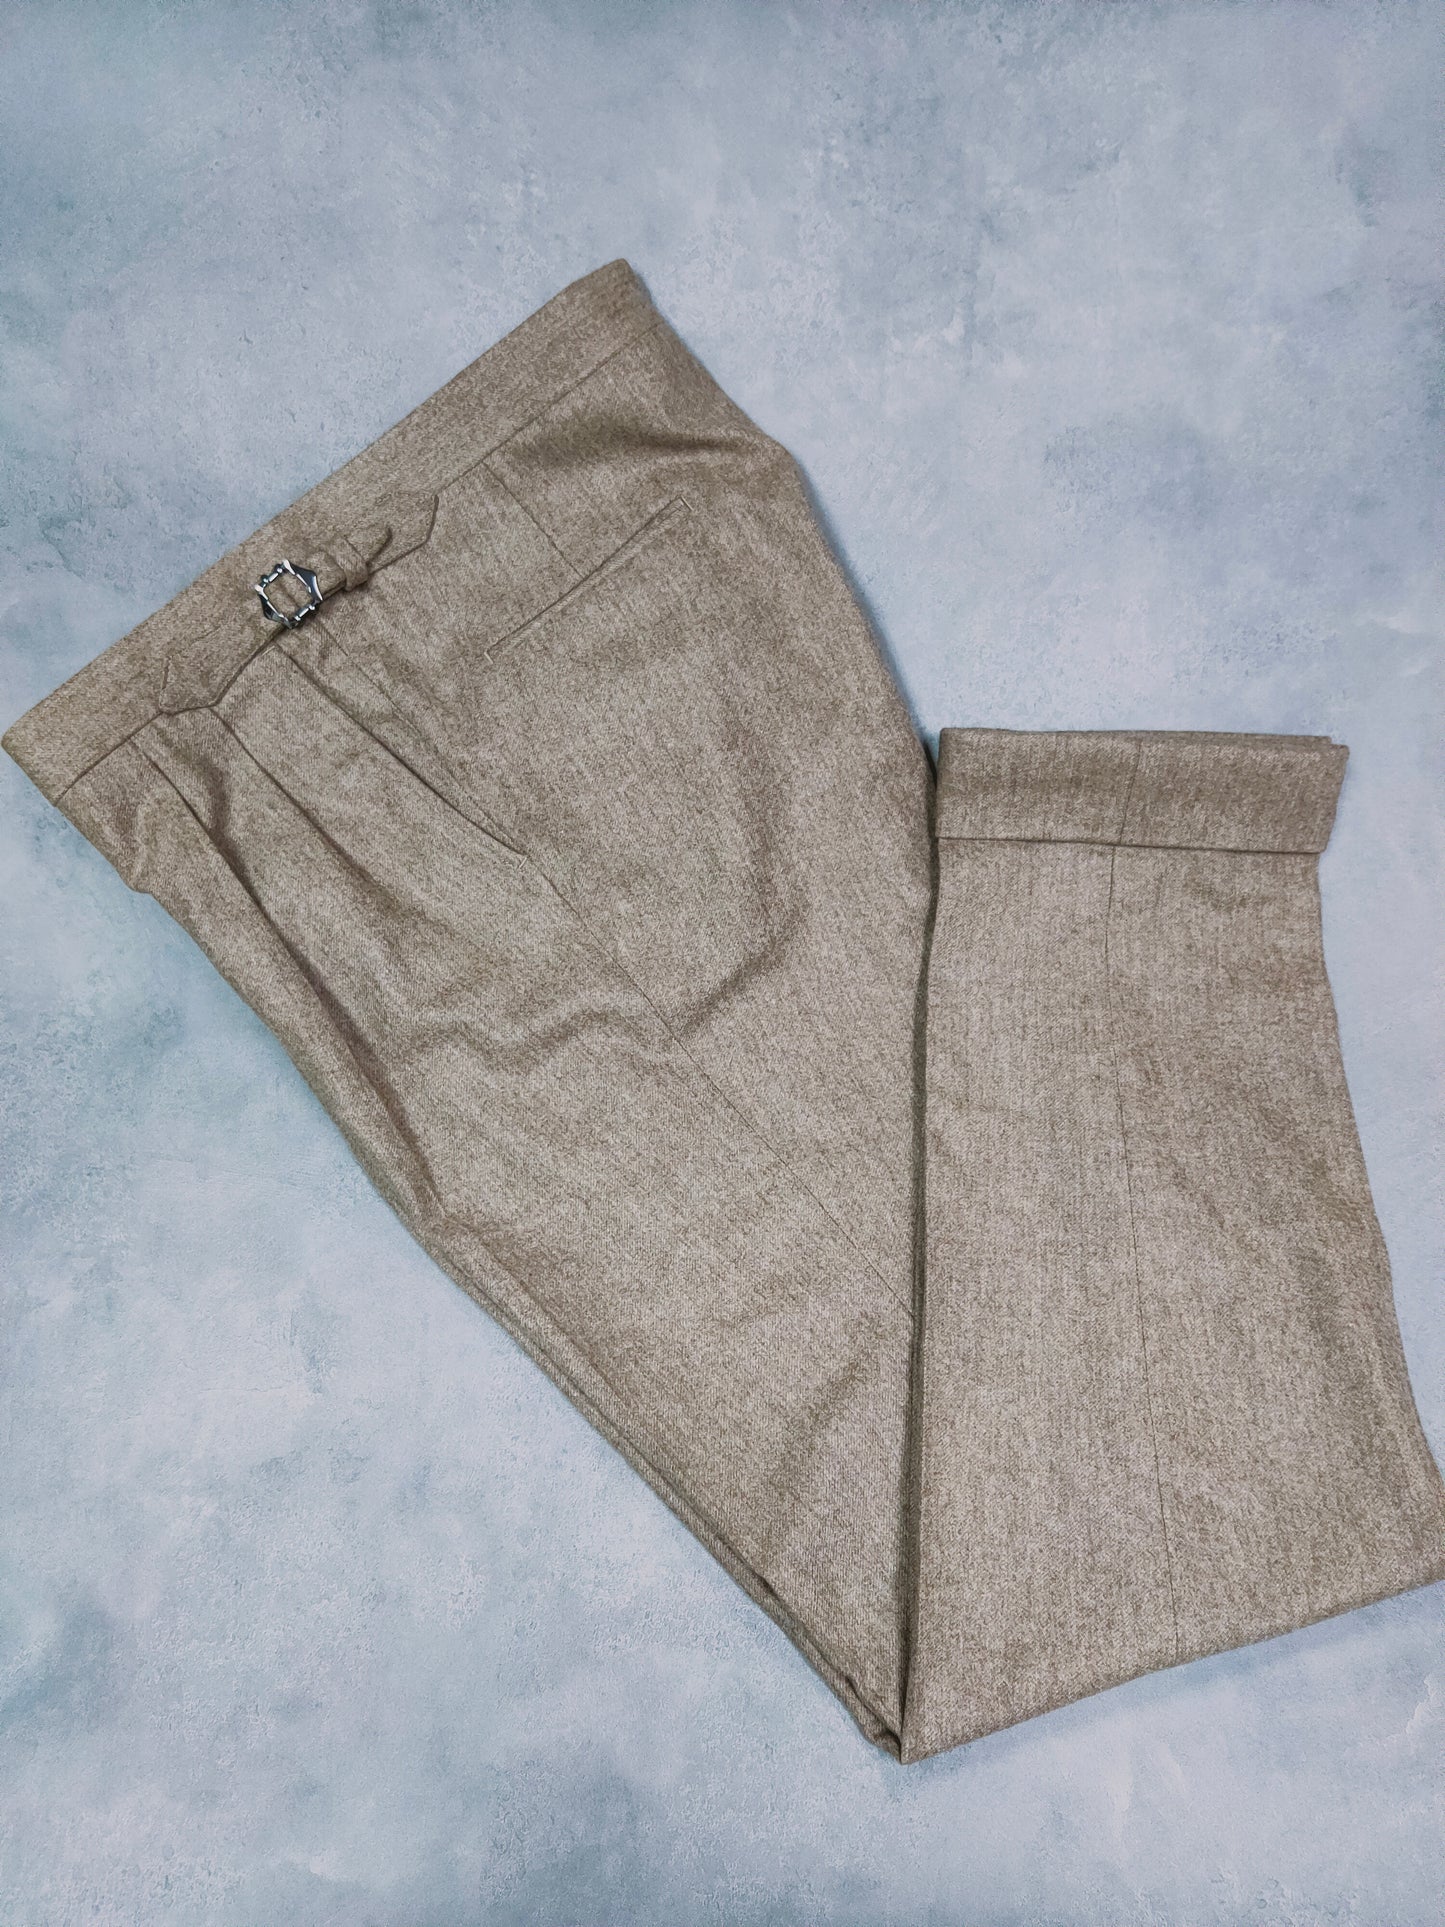 [Sample] VBC Flannel S110 Biscuit Trousers  - ST132